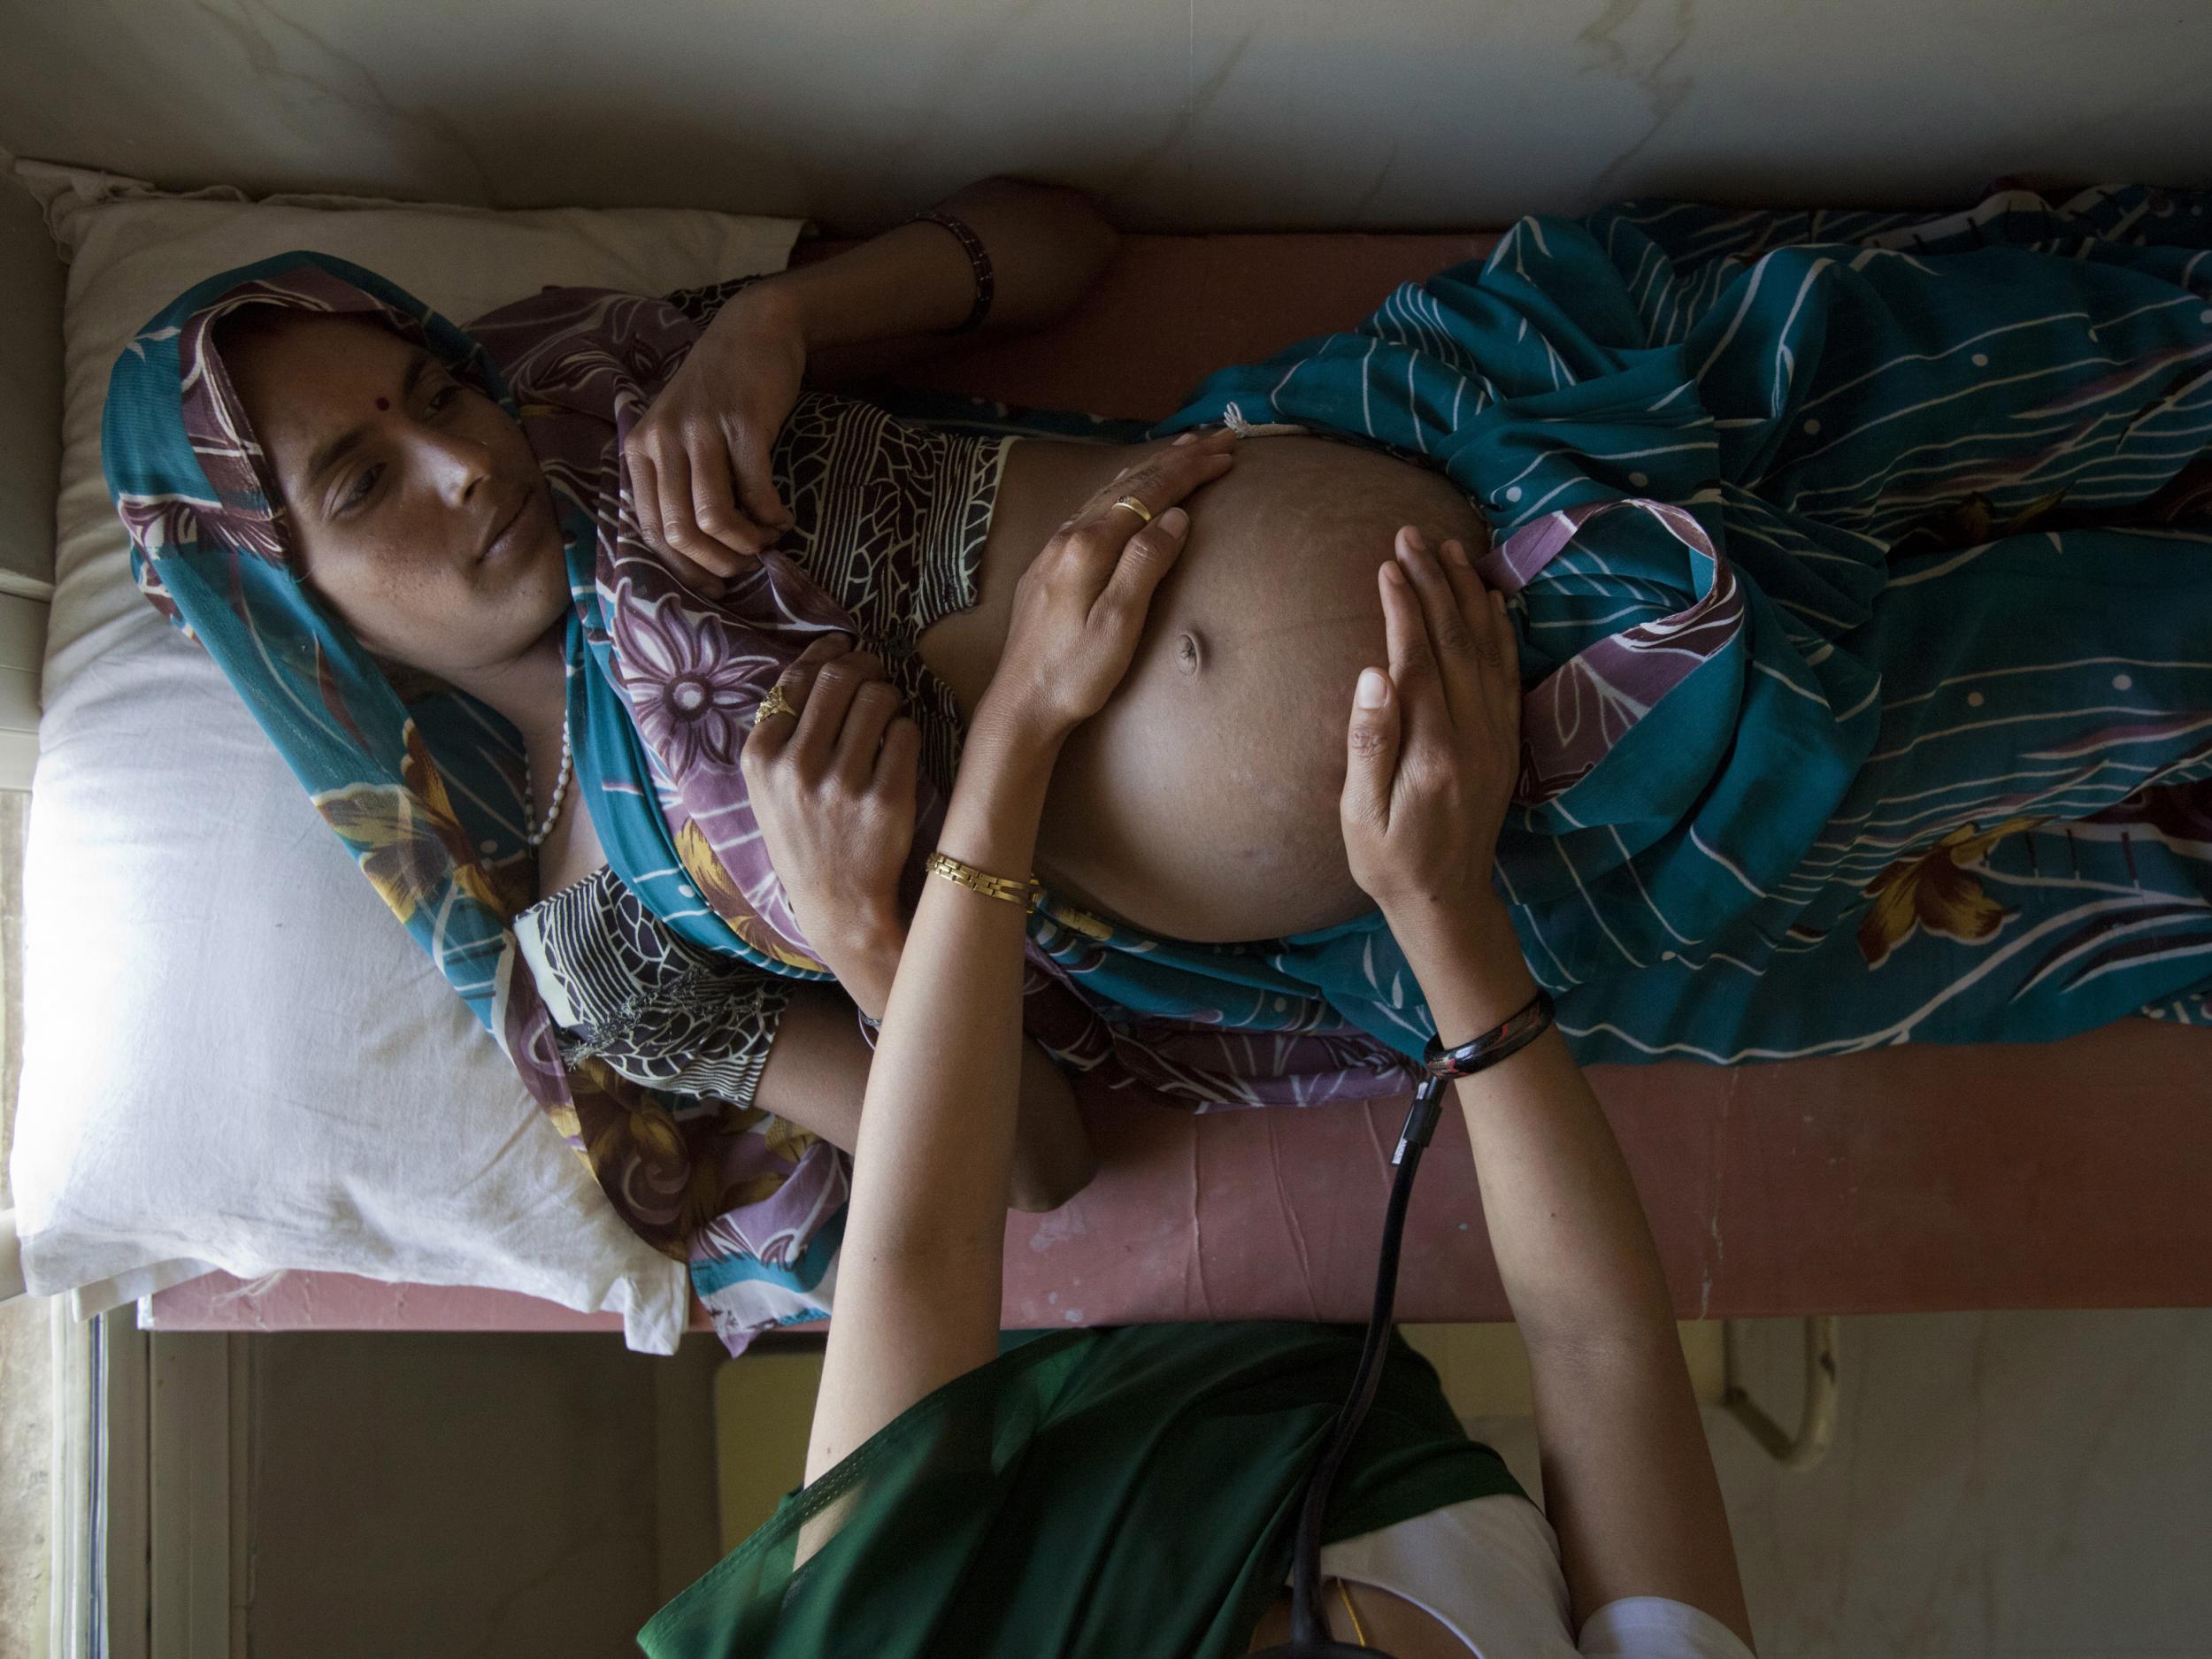 Indian Government advises pregnant women to avoid thinking about sex The Independent The Independent pic pic